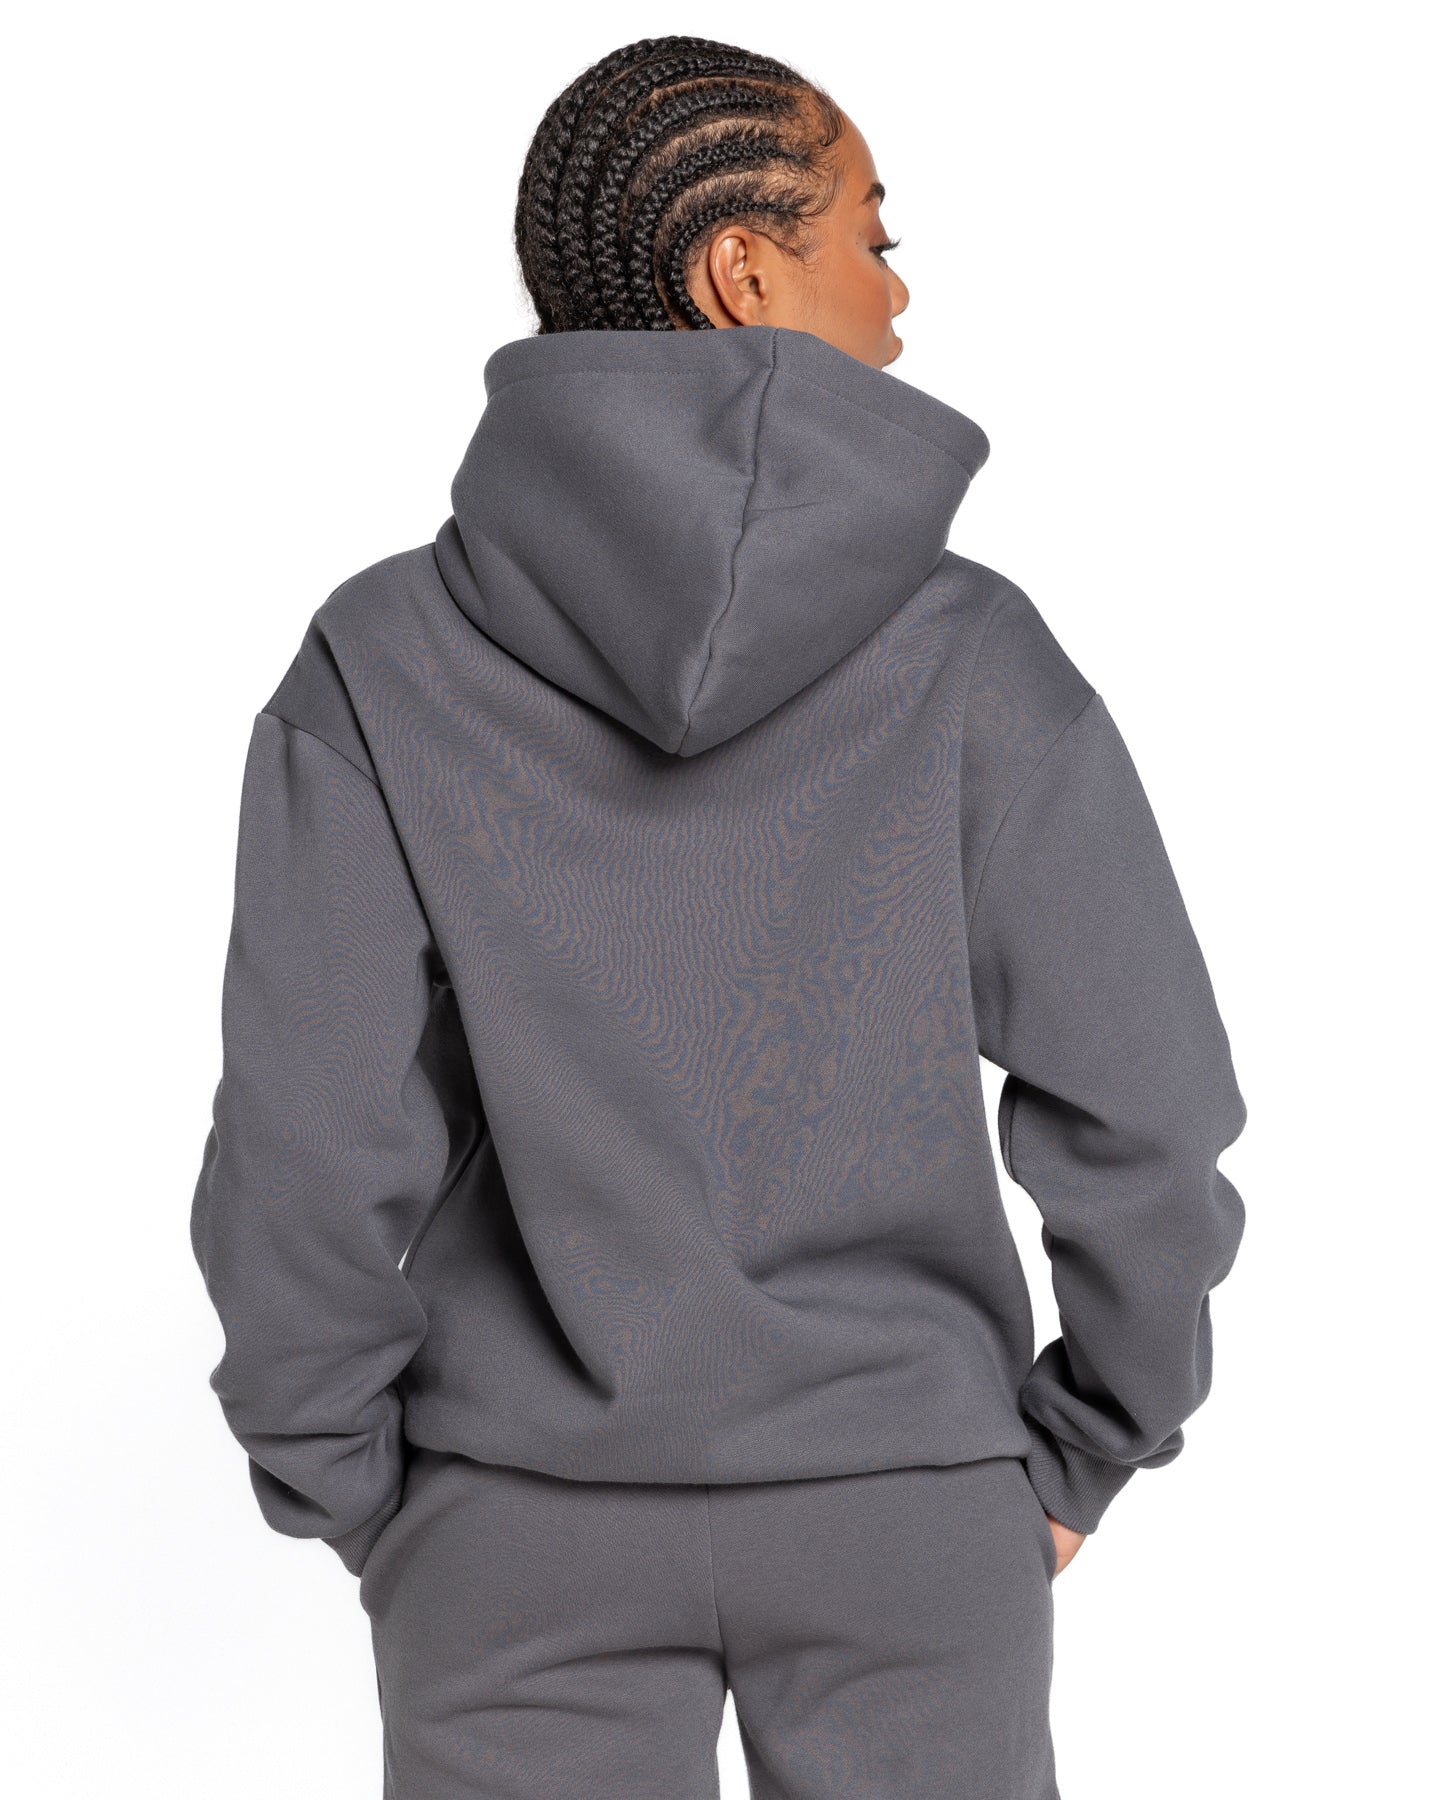 Cozy Escape Hooded Pullover Set - Slate Blue 1X